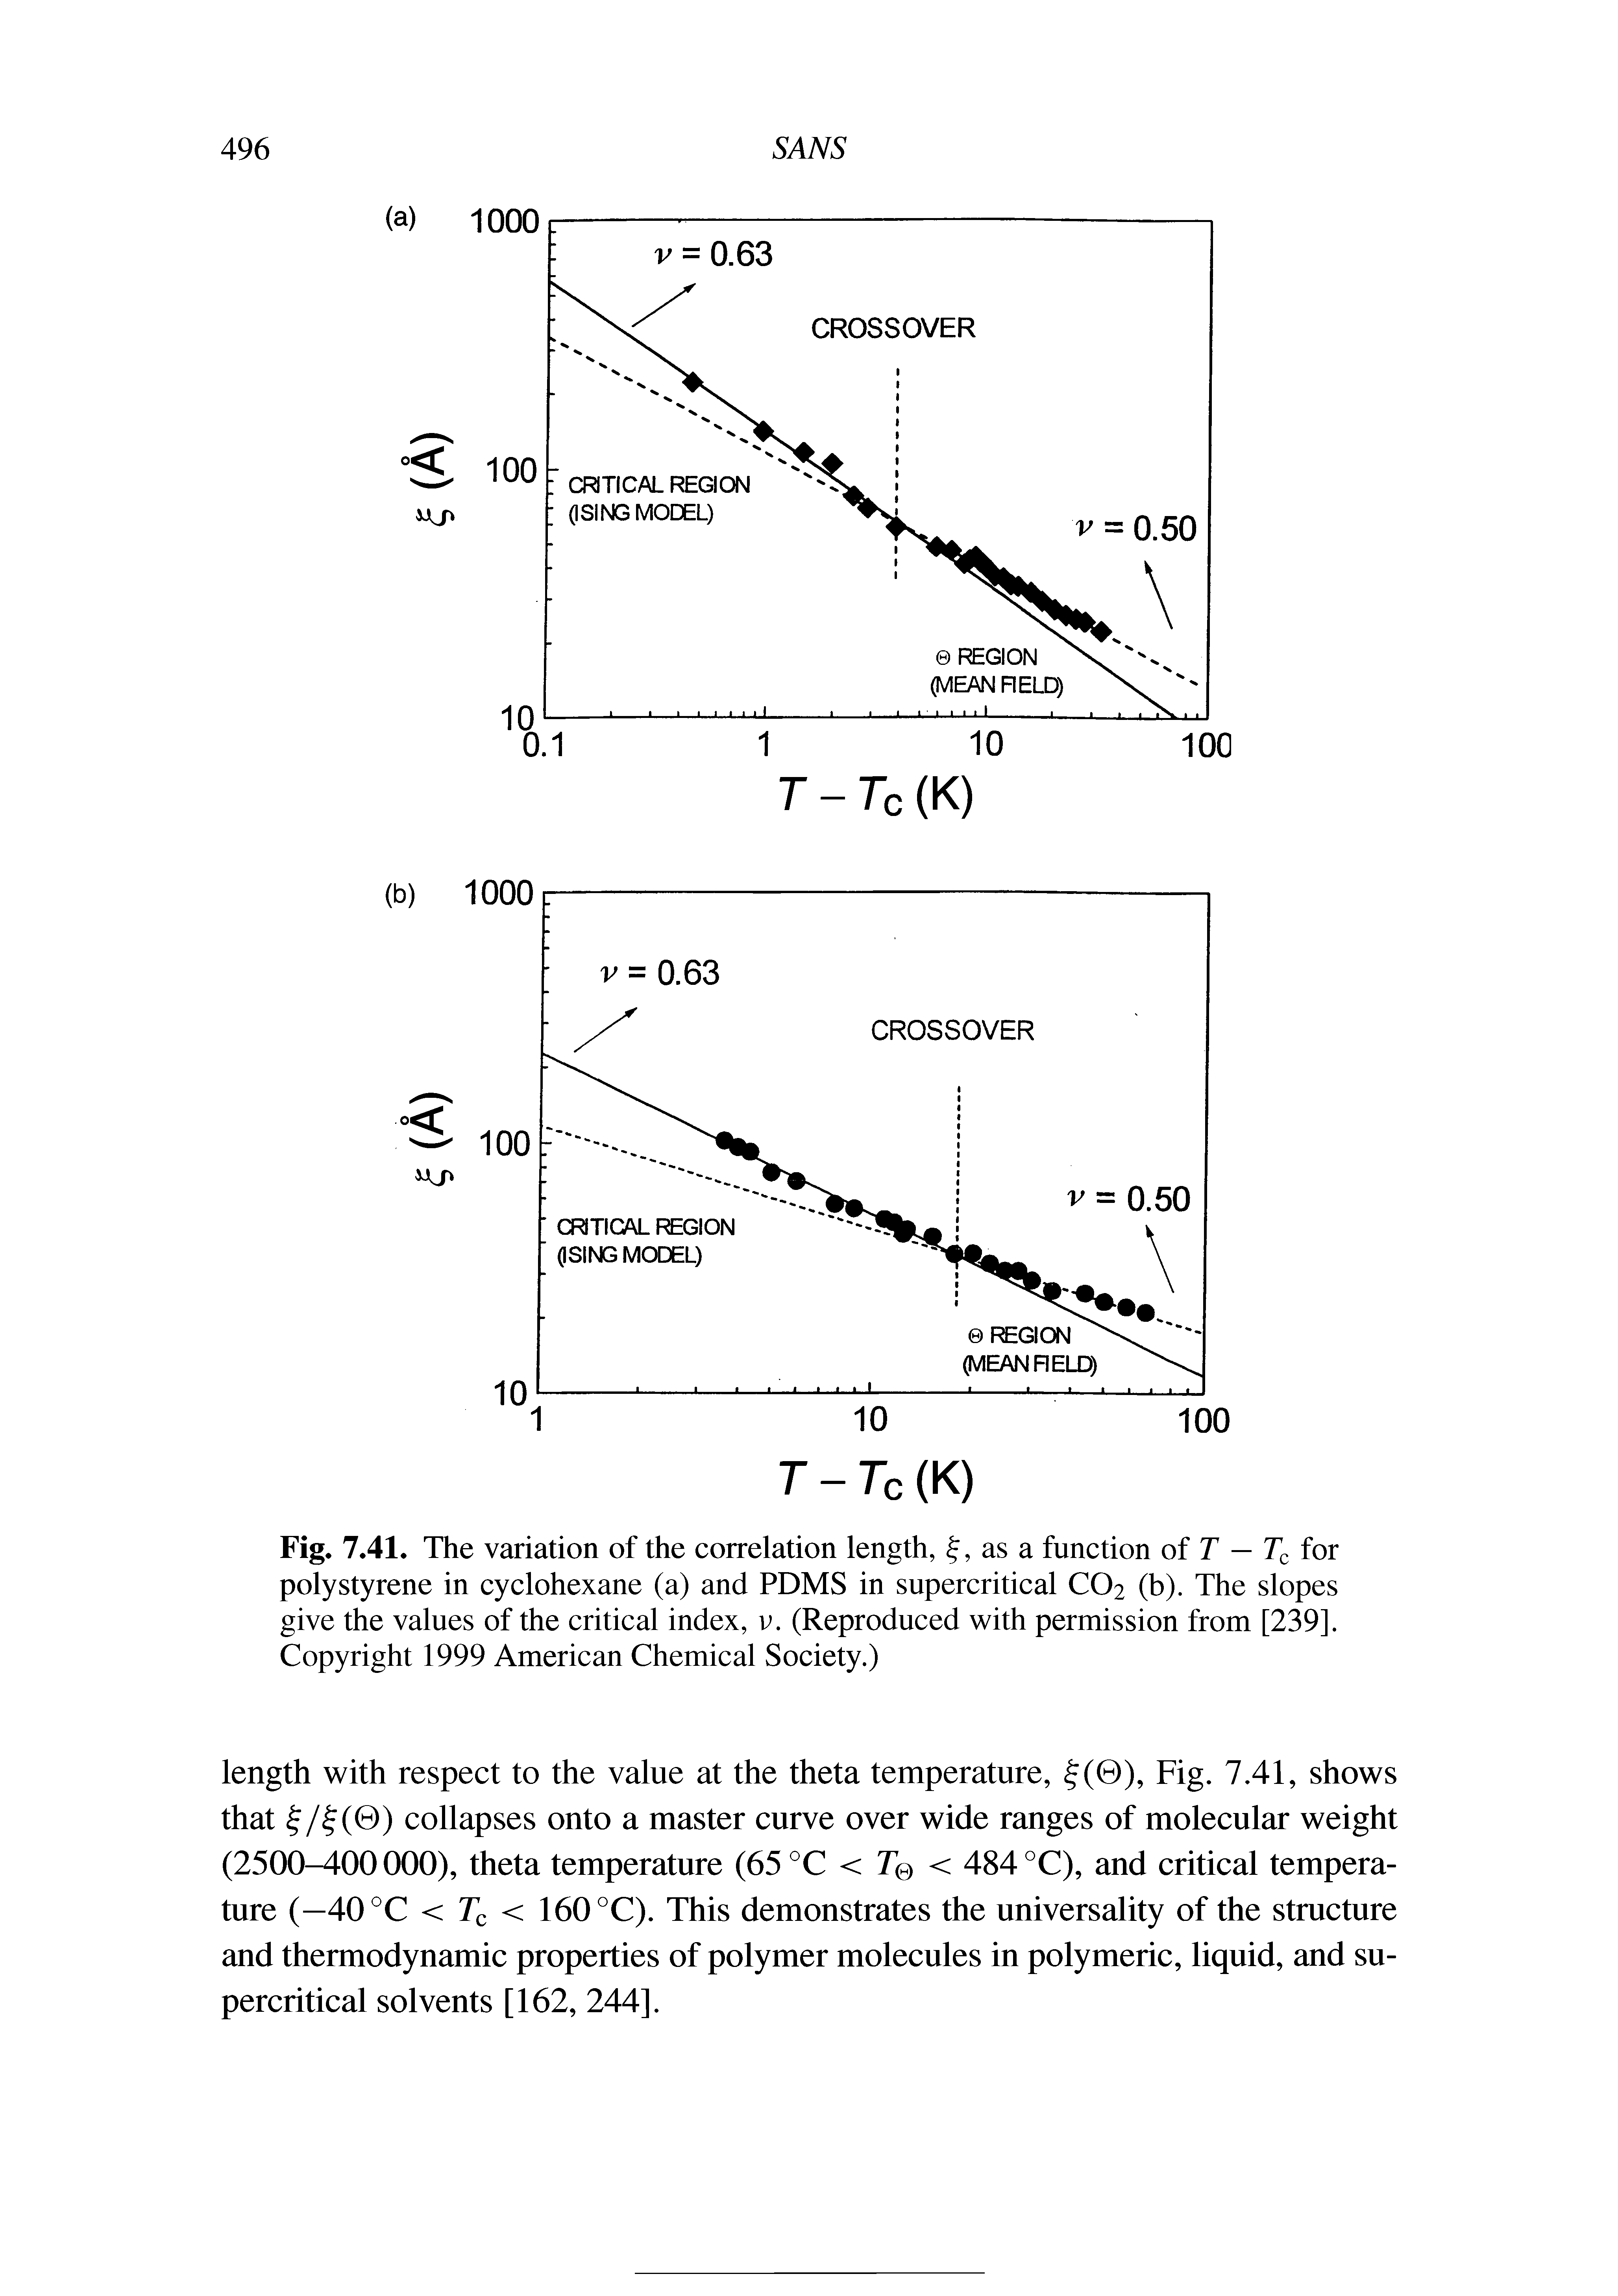 Fig. 7.41. The variation of the correlation length, , as a function of T — Tc for polystyrene in cyclohexane (a) and PDMS in supercritical CO2 (b). The slopes give the values of the critical index, v. (Reproduced with permission from [239]. Copyright 1999 American Chemical Society.)...